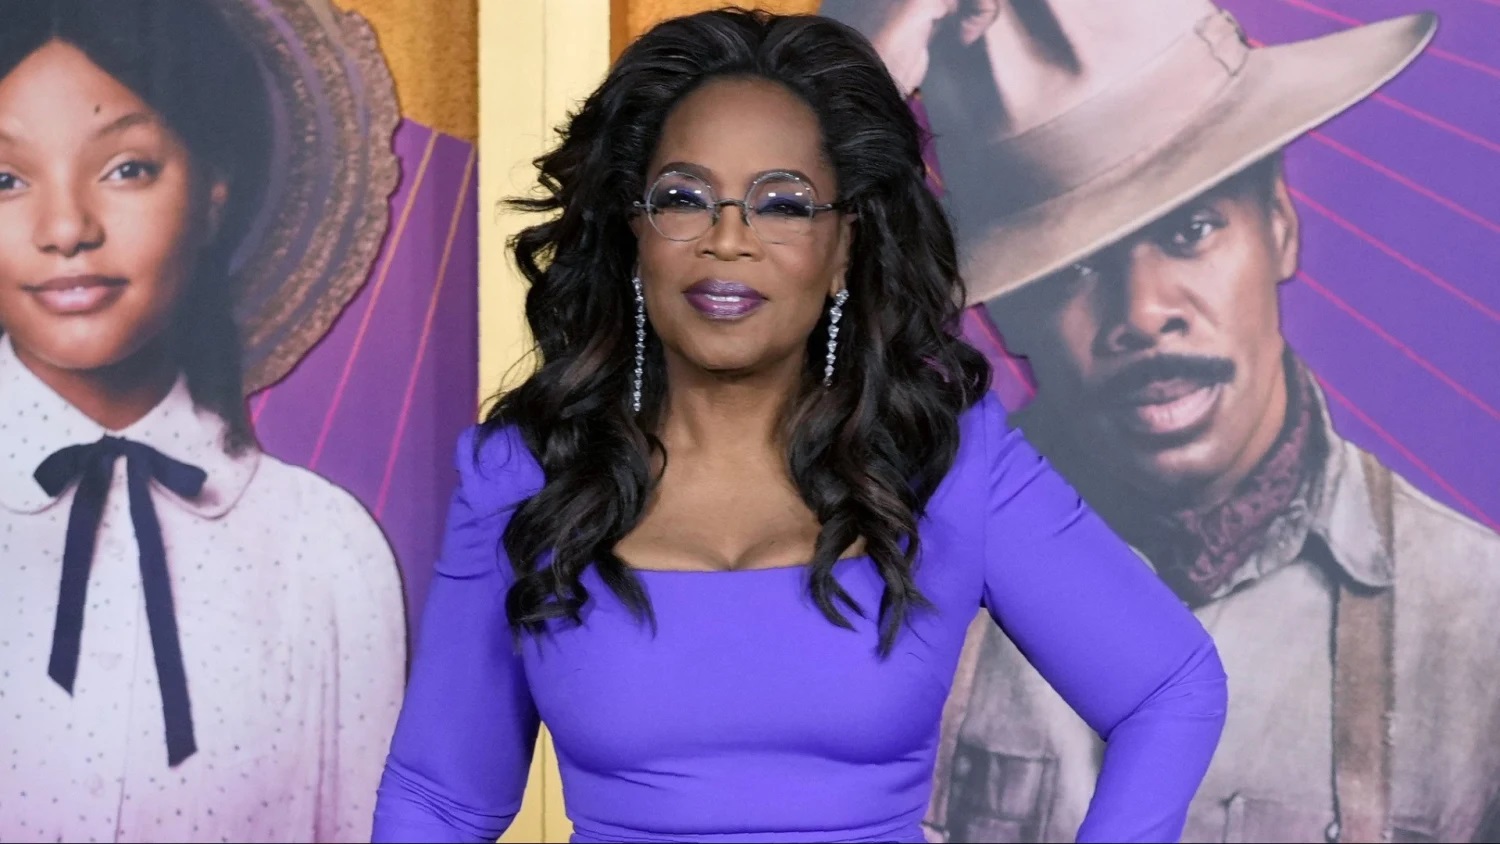 oprah-winfrey-reveals-her-use-of-weight-loss-medication-for-maintenance-after-40-lb-drop